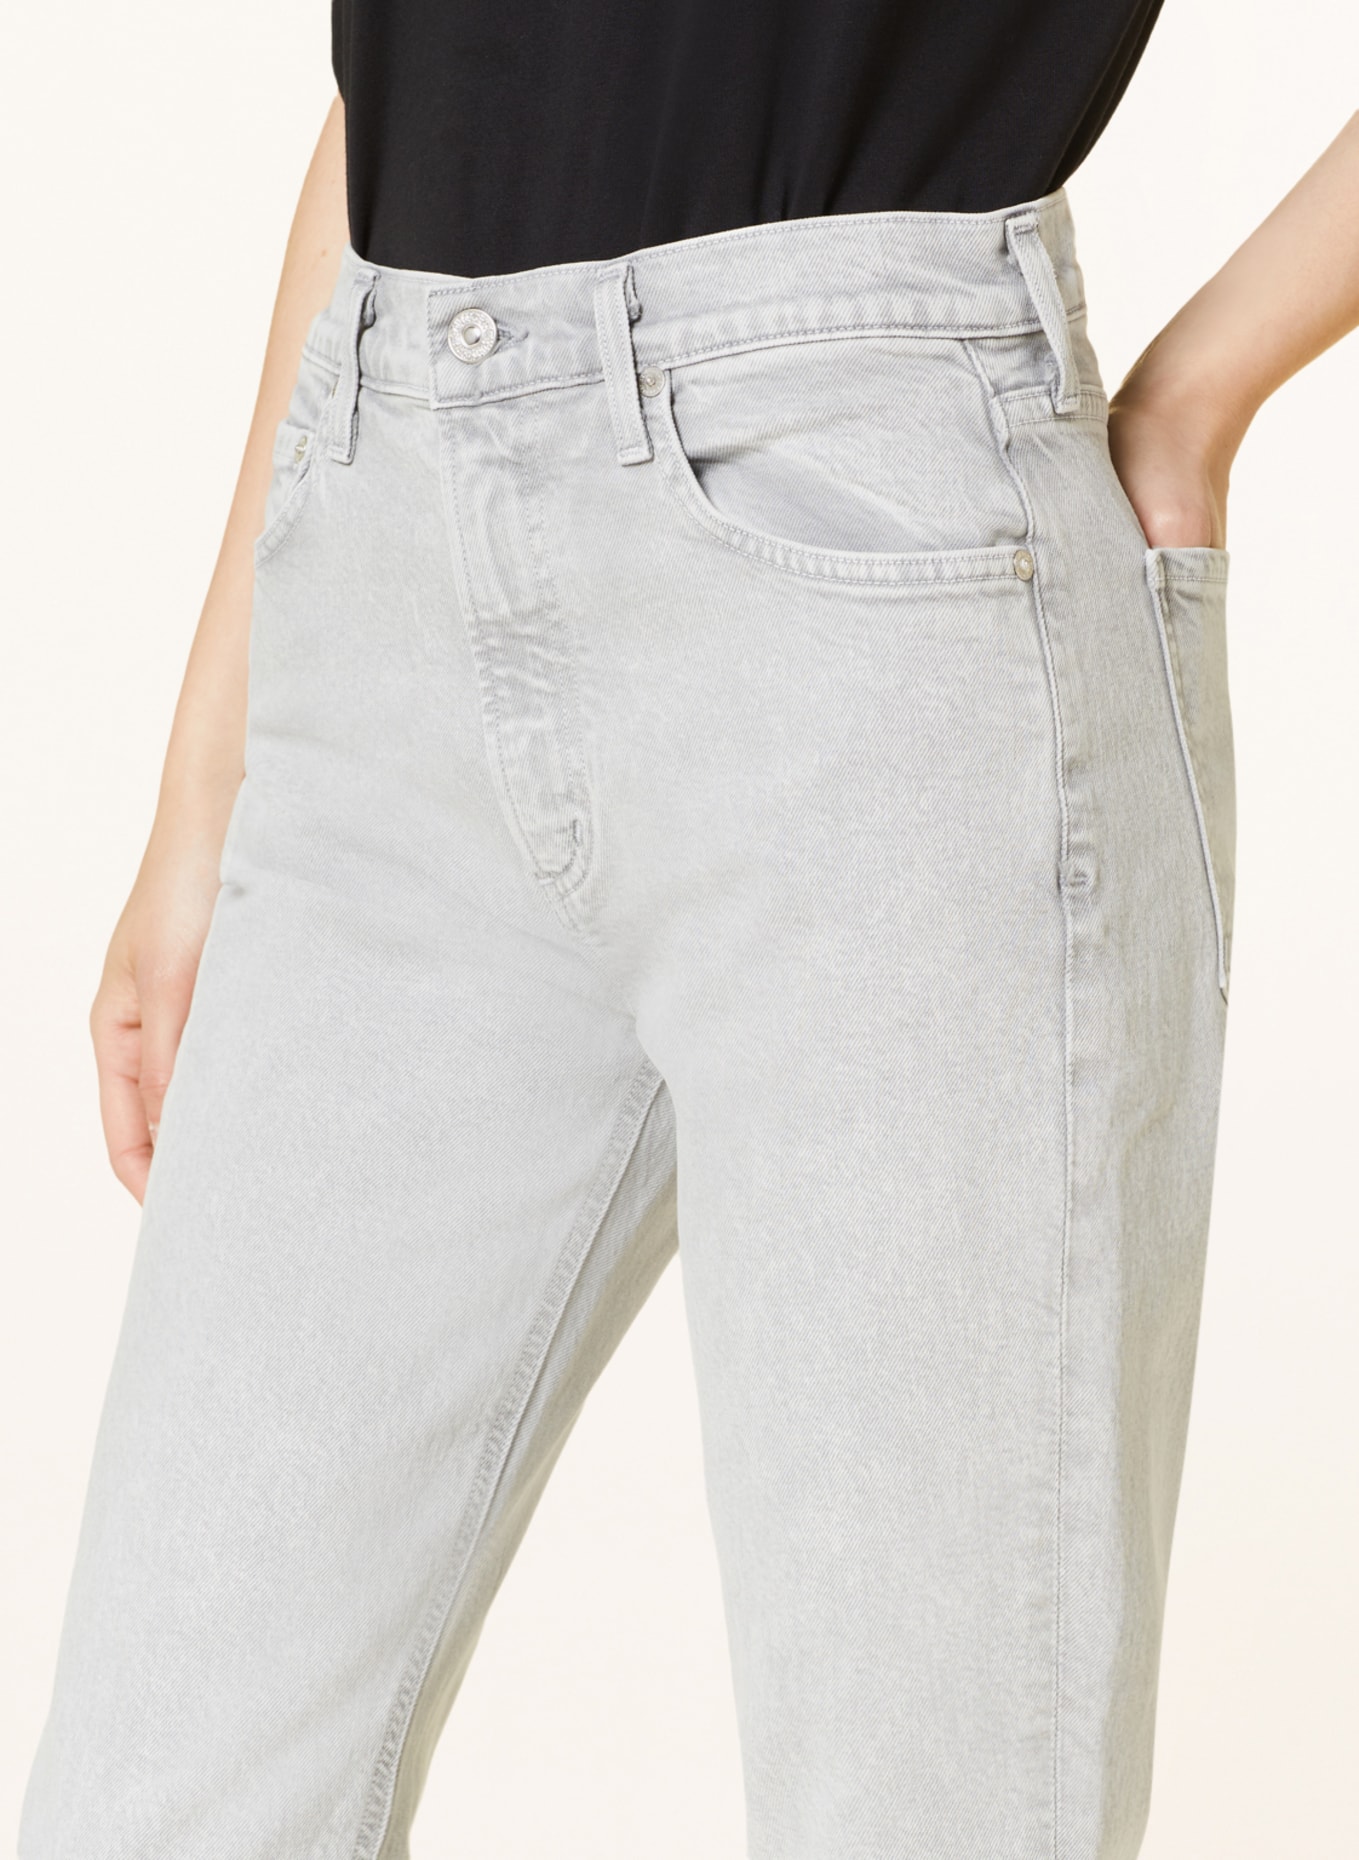 CITIZENS of HUMANITY 7/8-Jeans ISOLA, Farbe: ABBEY LIGHT GREY (Bild 5)